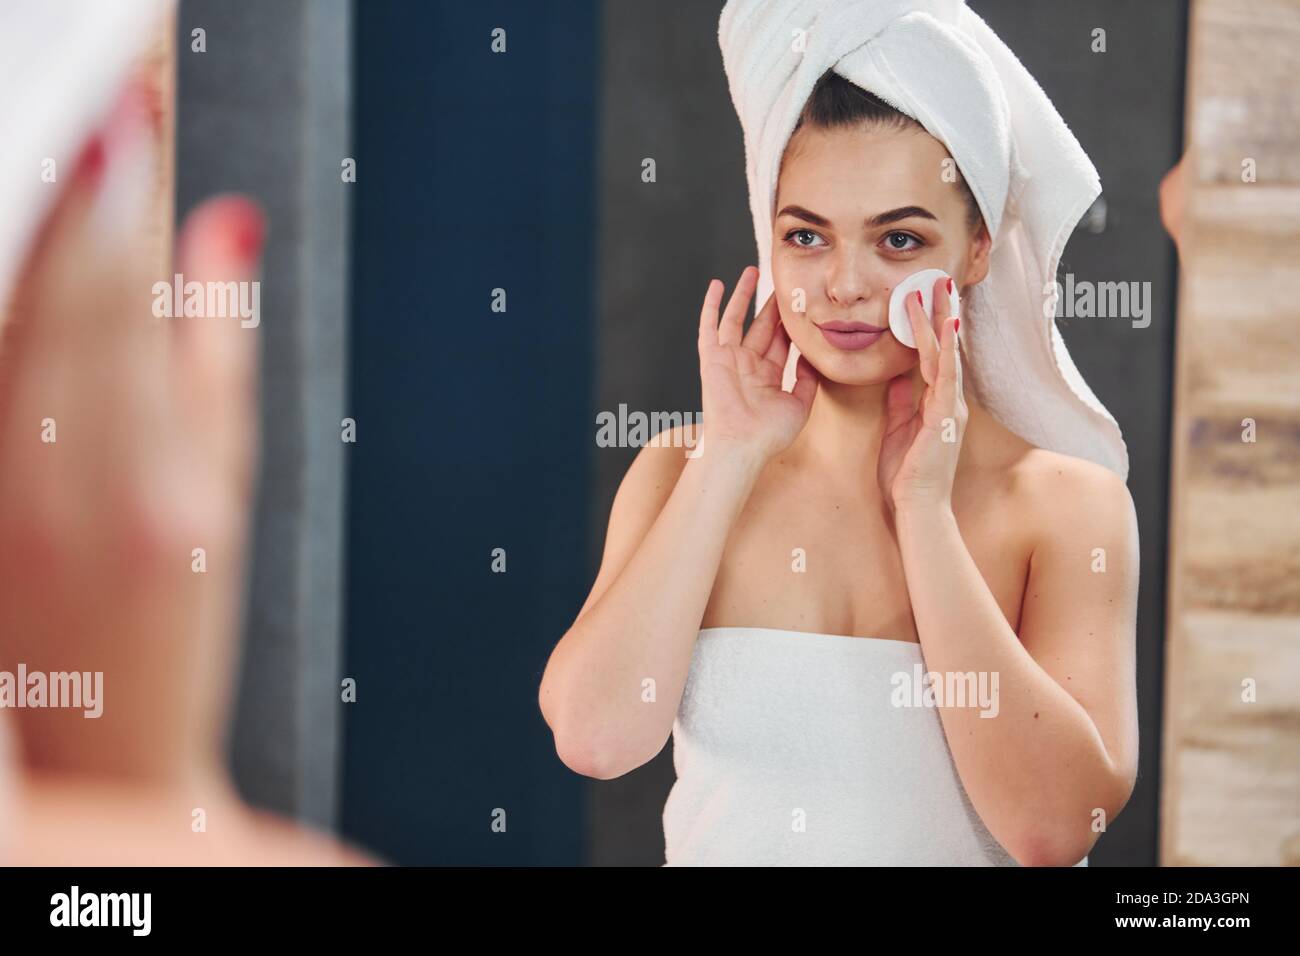 Beautiful young woman standing in bathroom, looking into the mirror and taking care of her face Stock Photo